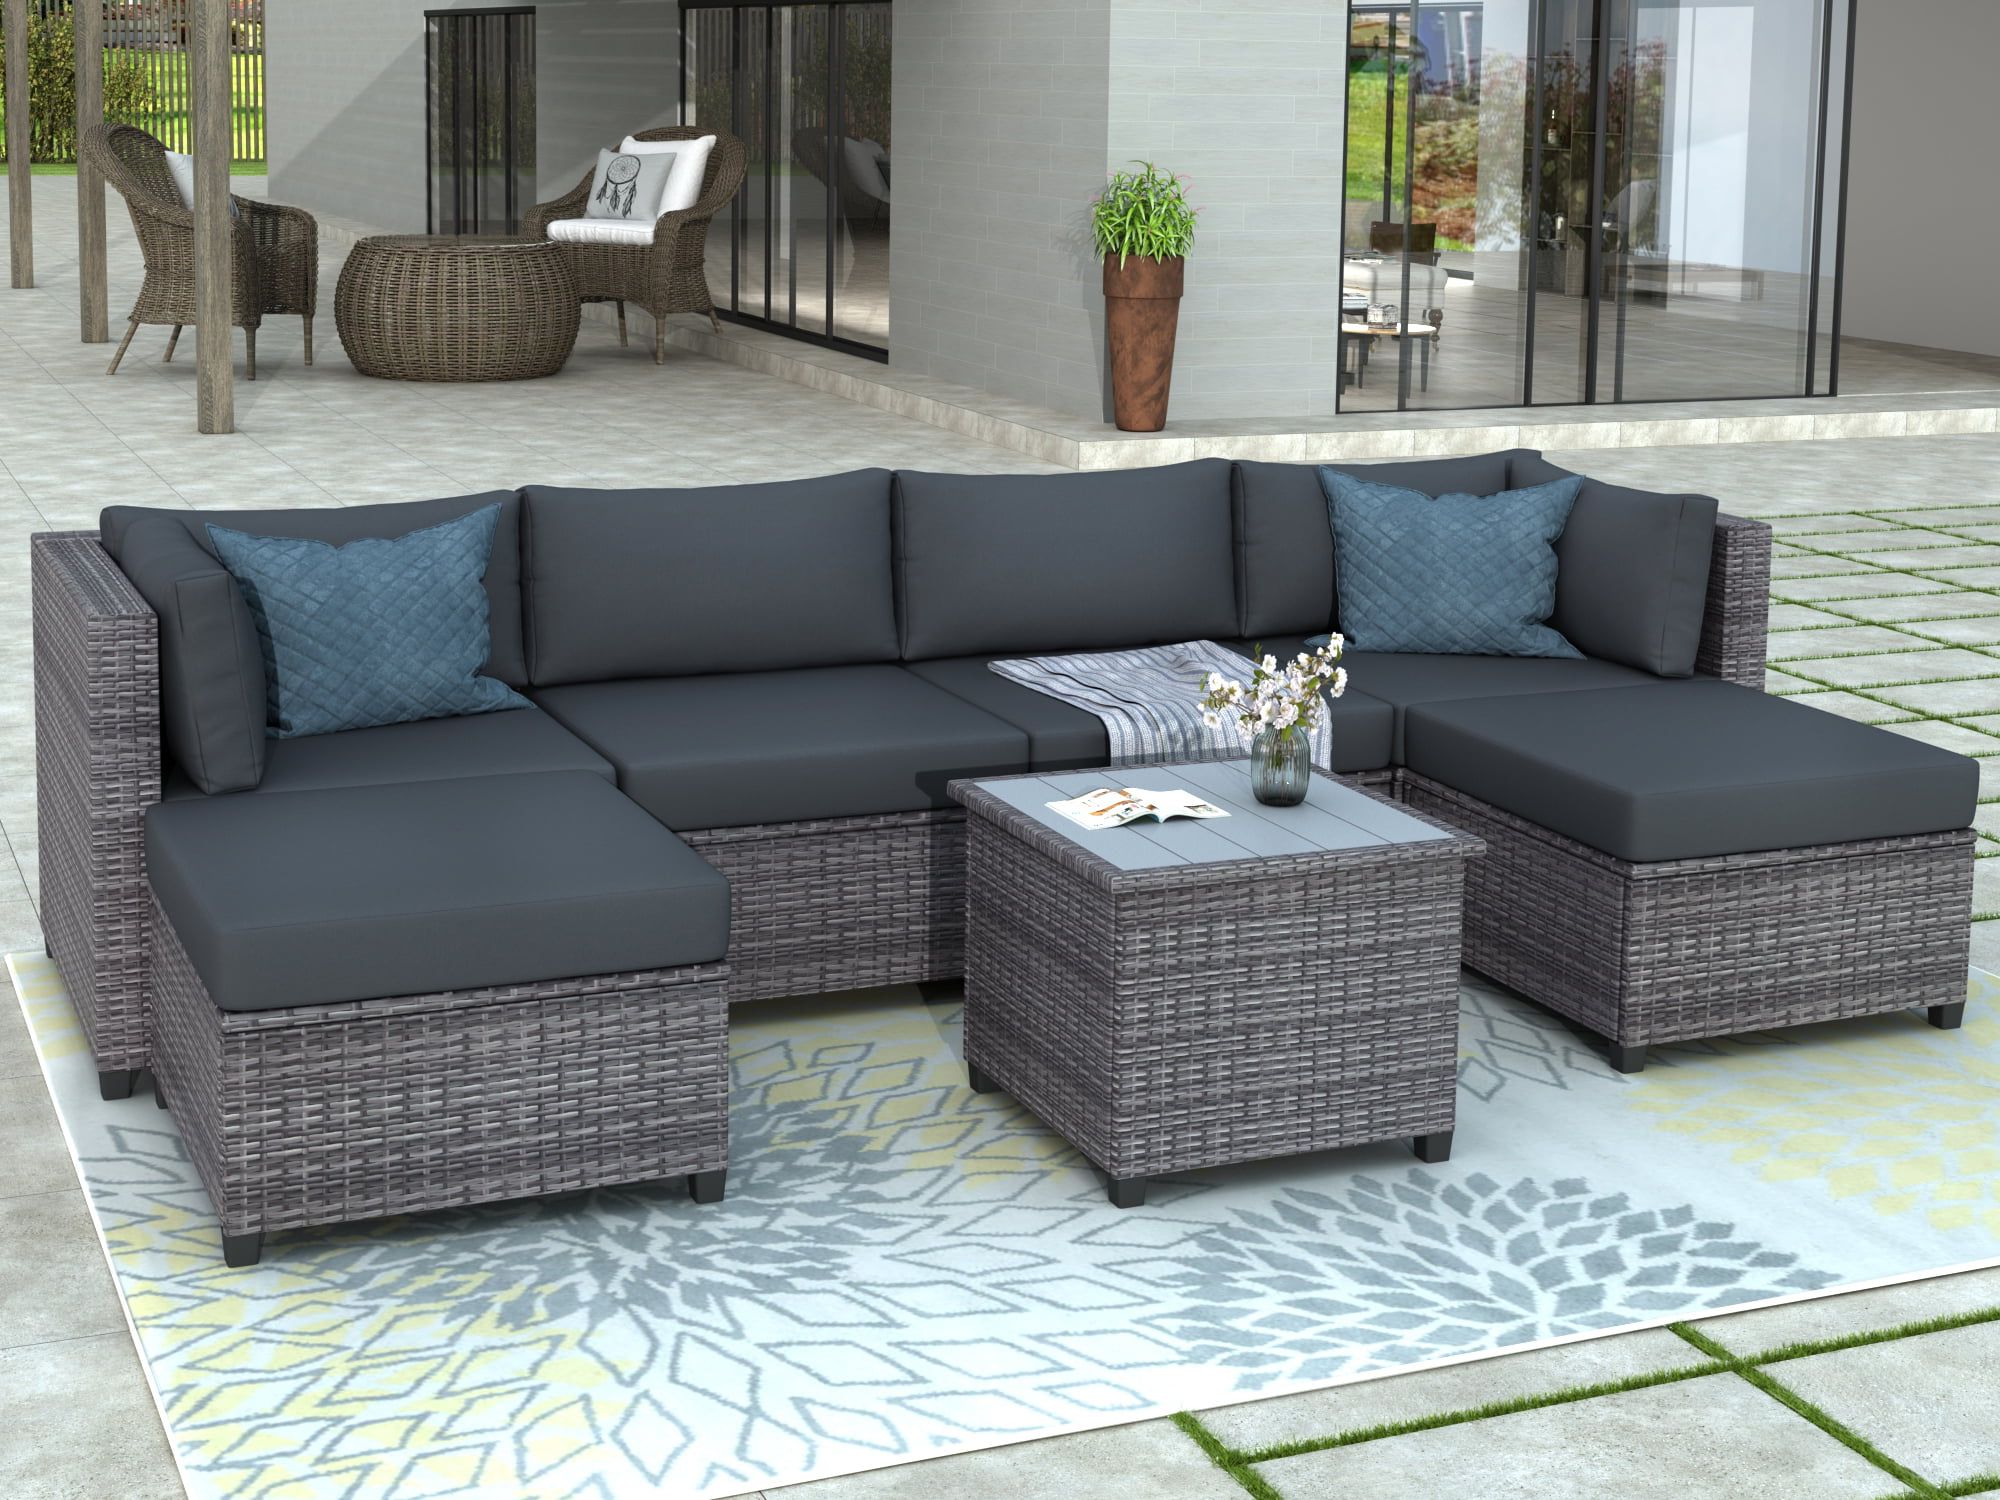 Outdoor Rattan Sectional Sofas With Coffee Table Throughout Most Popular 7 Piece Patio Sectional Sofa Set With 4 Rattan Wicker Chairs, 2 Ottoman, Coffee  Table, All Weather Outdoor Conversation Set With Gray Cushions For  Backyard, Porch, Garden, Poolside, L5018 – Walmart (Photo 6 of 15)